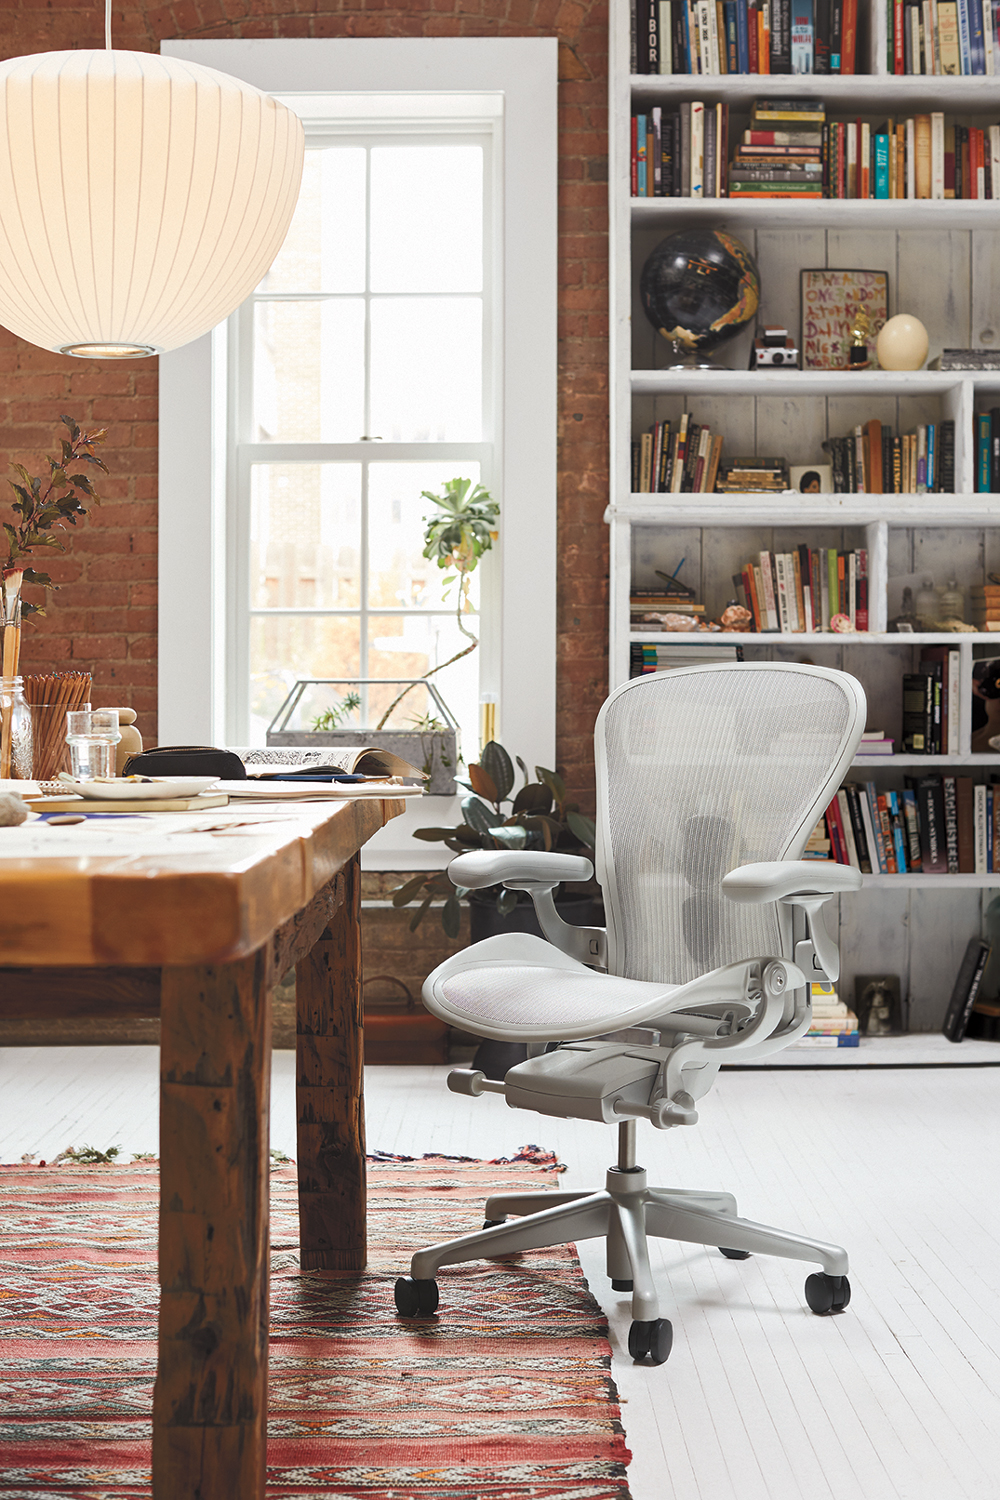 Vintage looking office with exposed brick wall, bookcase, and white pendant light